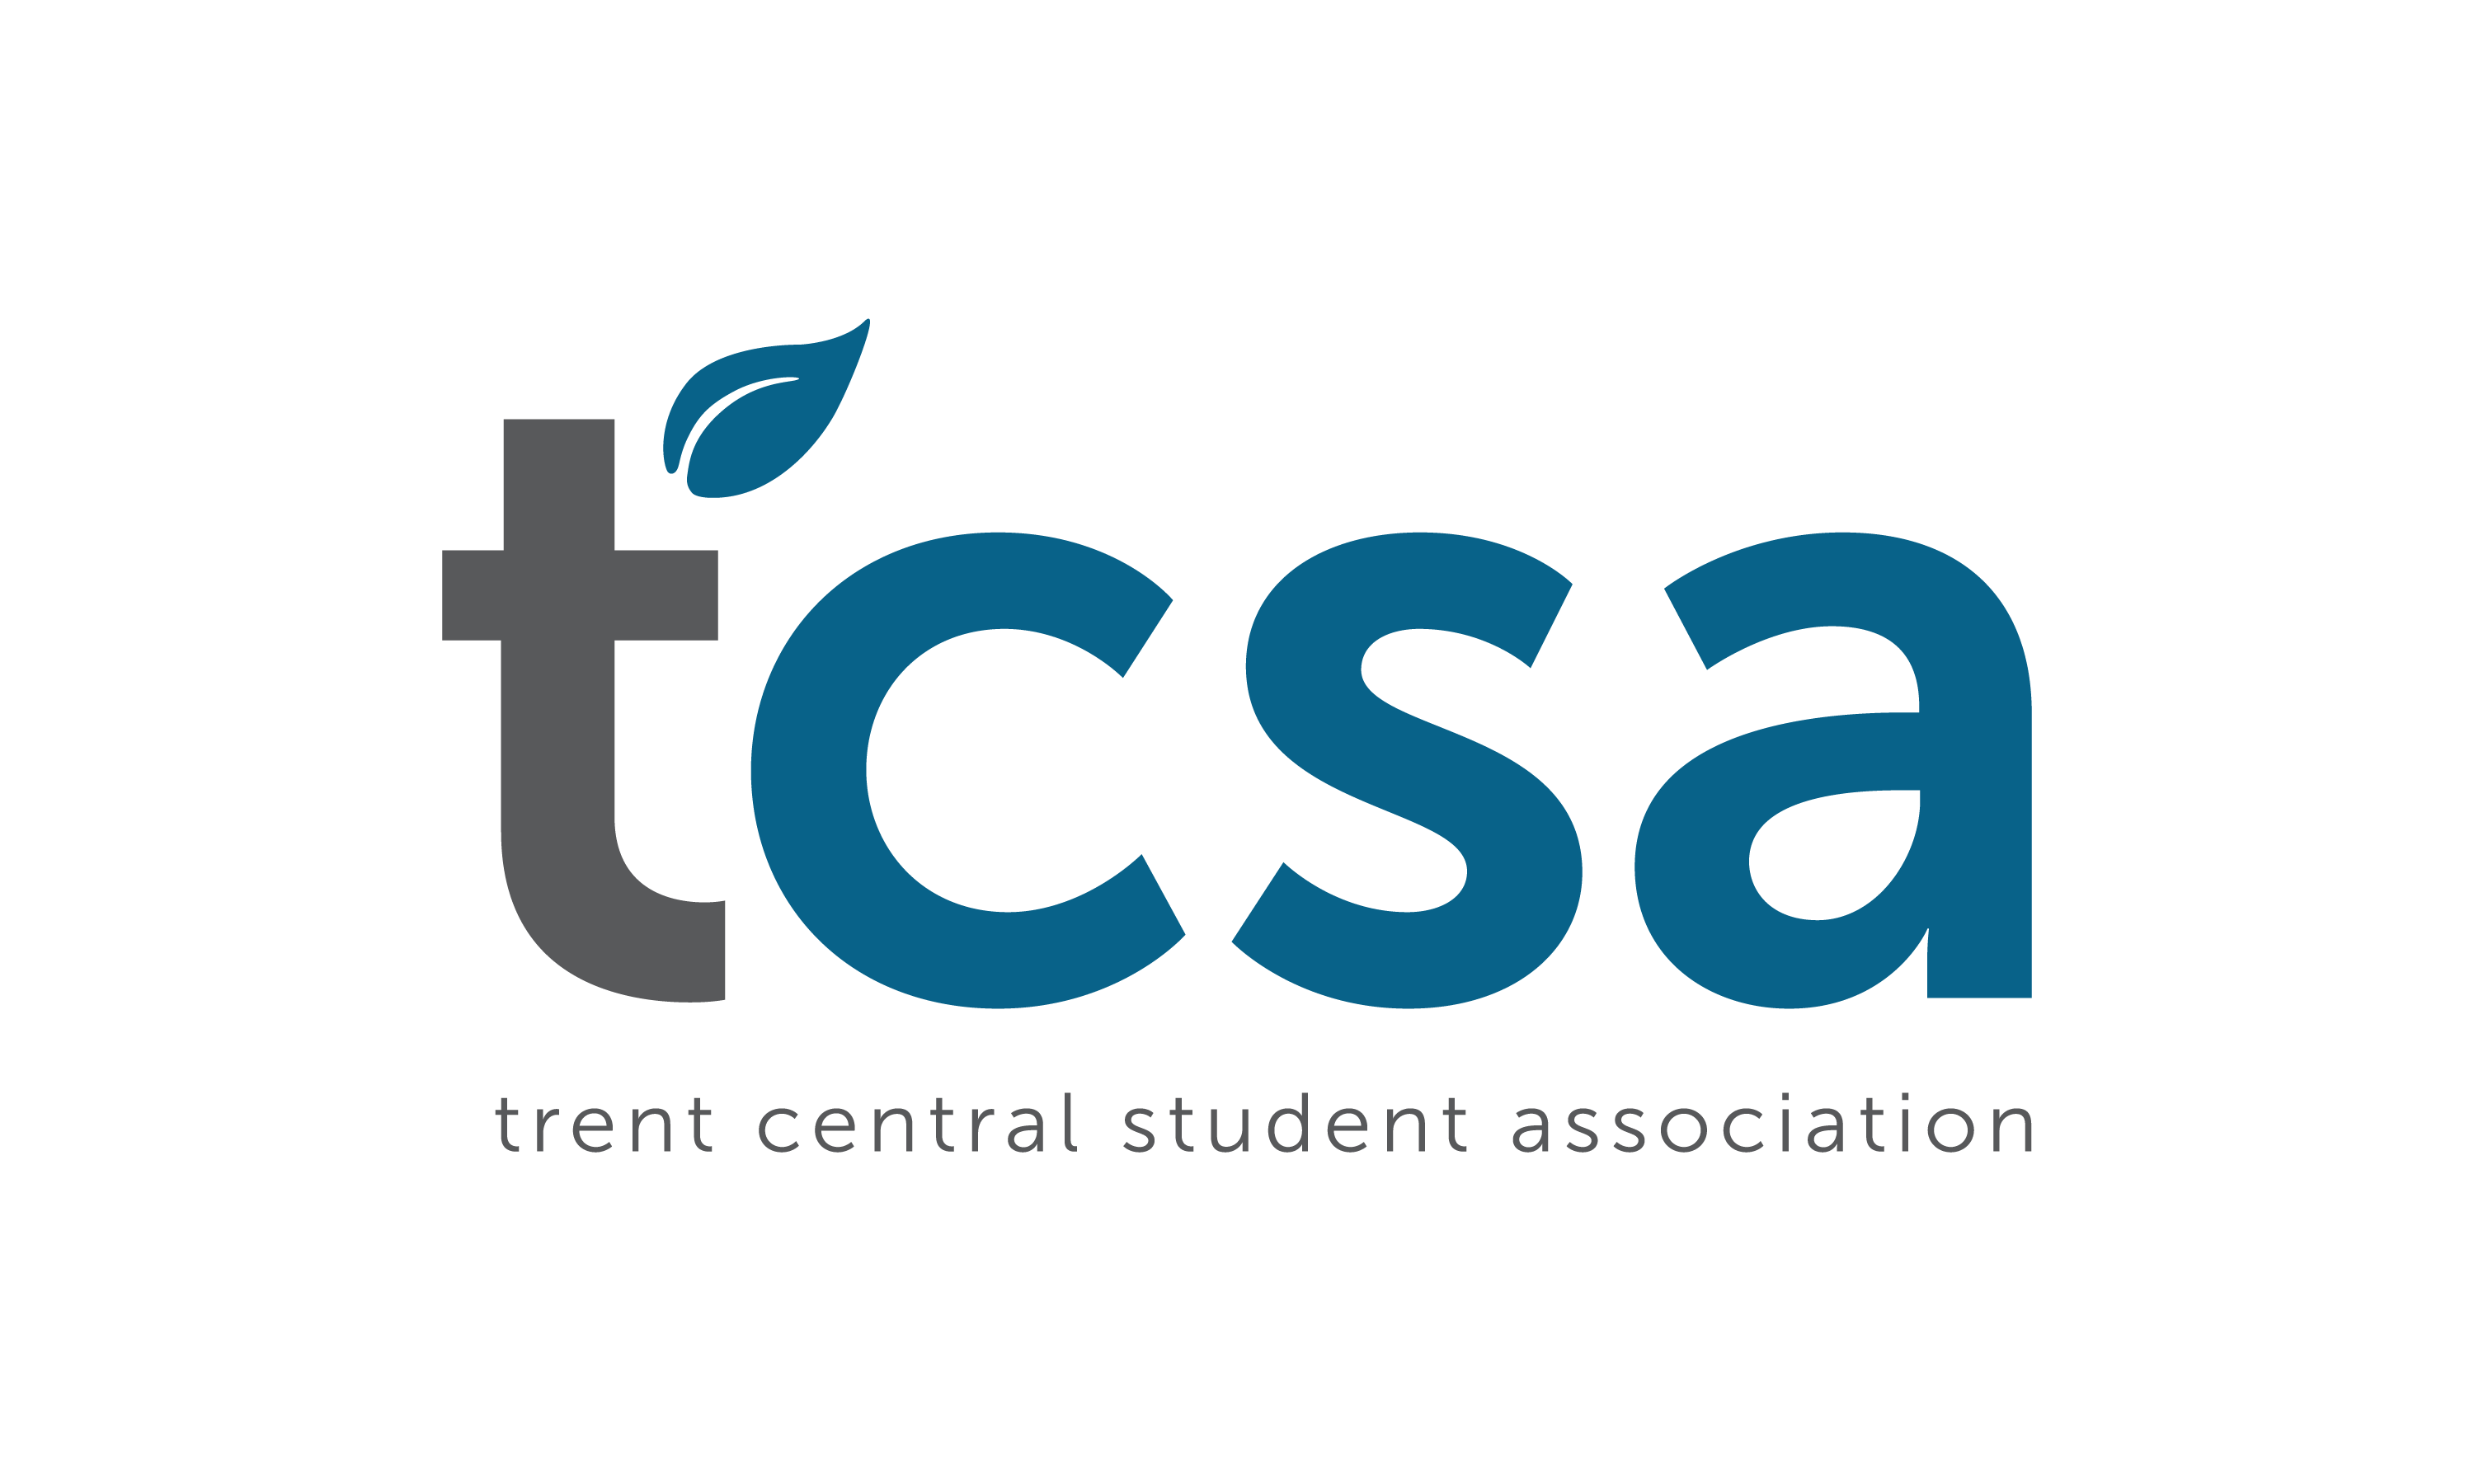 Trent Central Student Association Logo in Grey and Blue